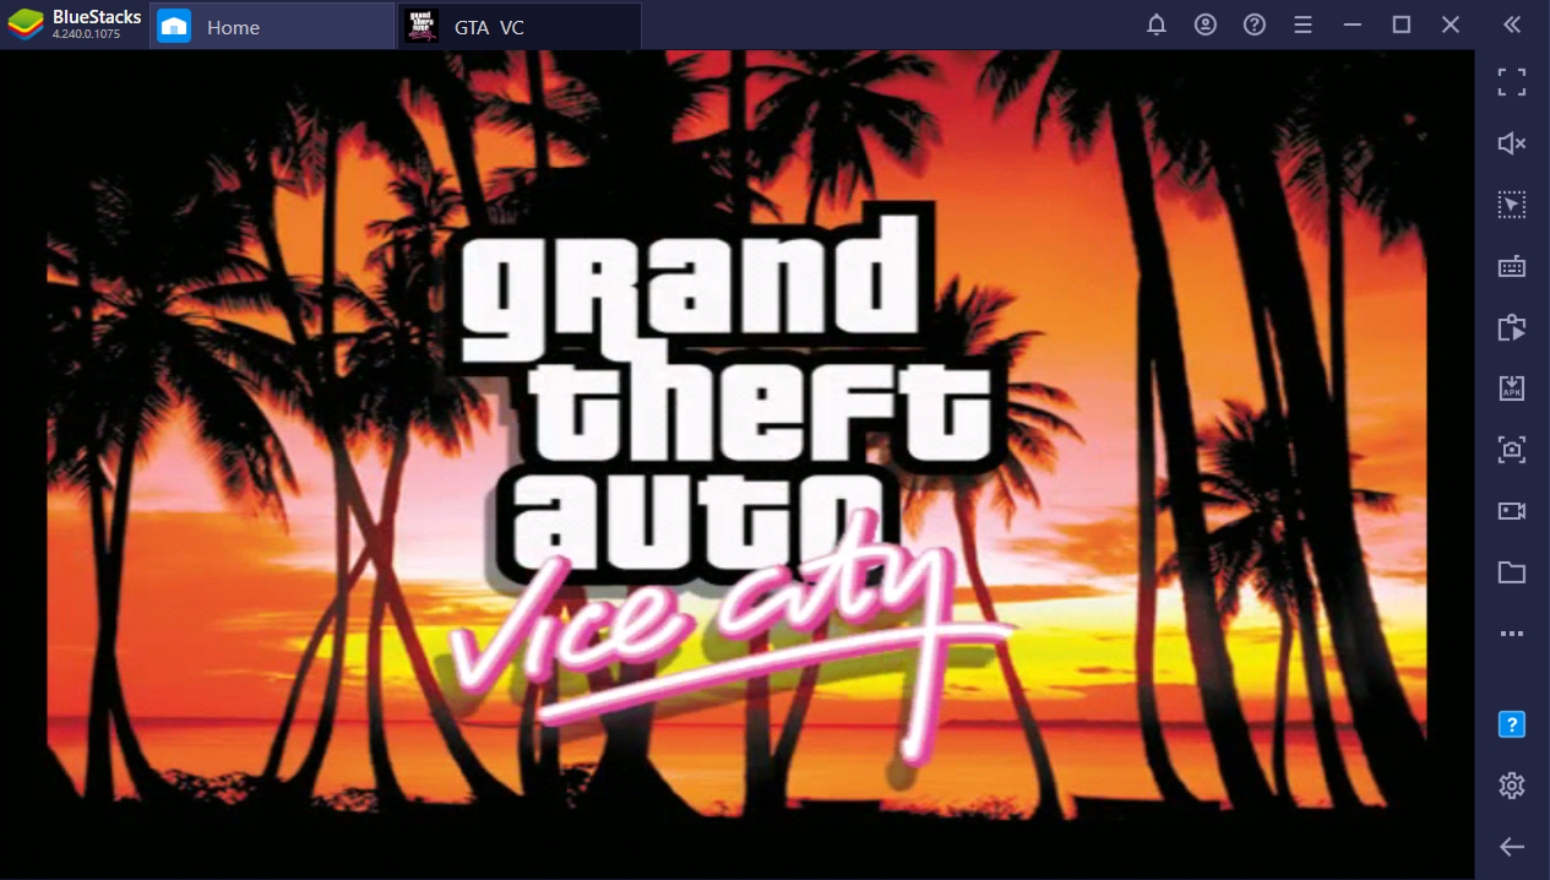 GTA Vice City Games - Play Vice City Online Games